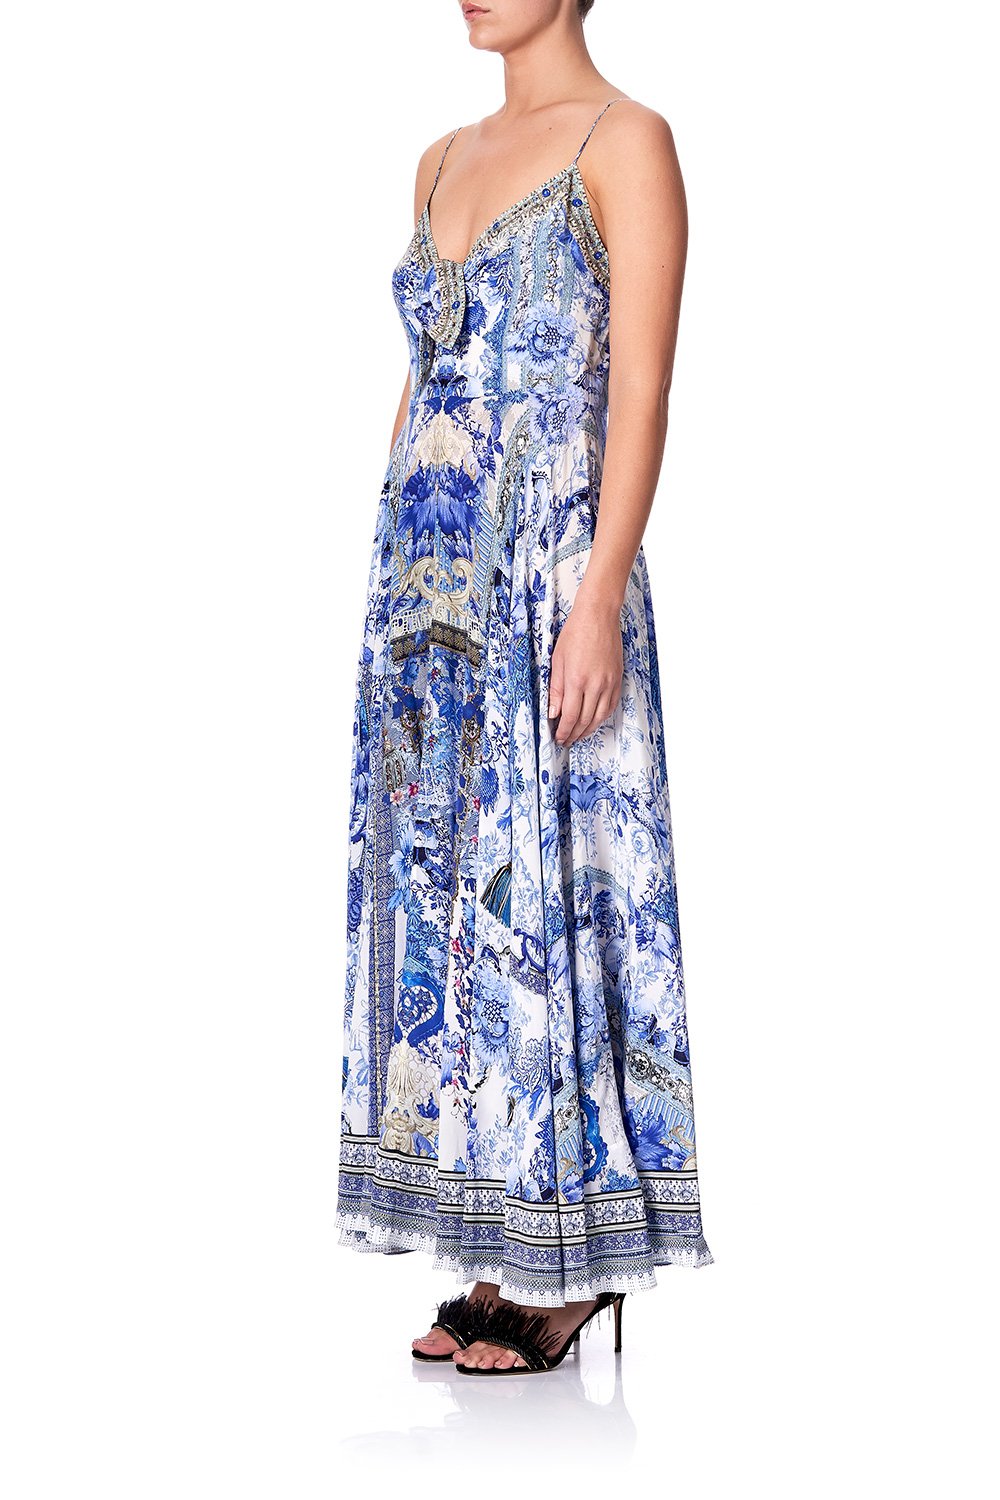 LONG DRESS WITH TIE FRONT PAINTED PROVINCIAL